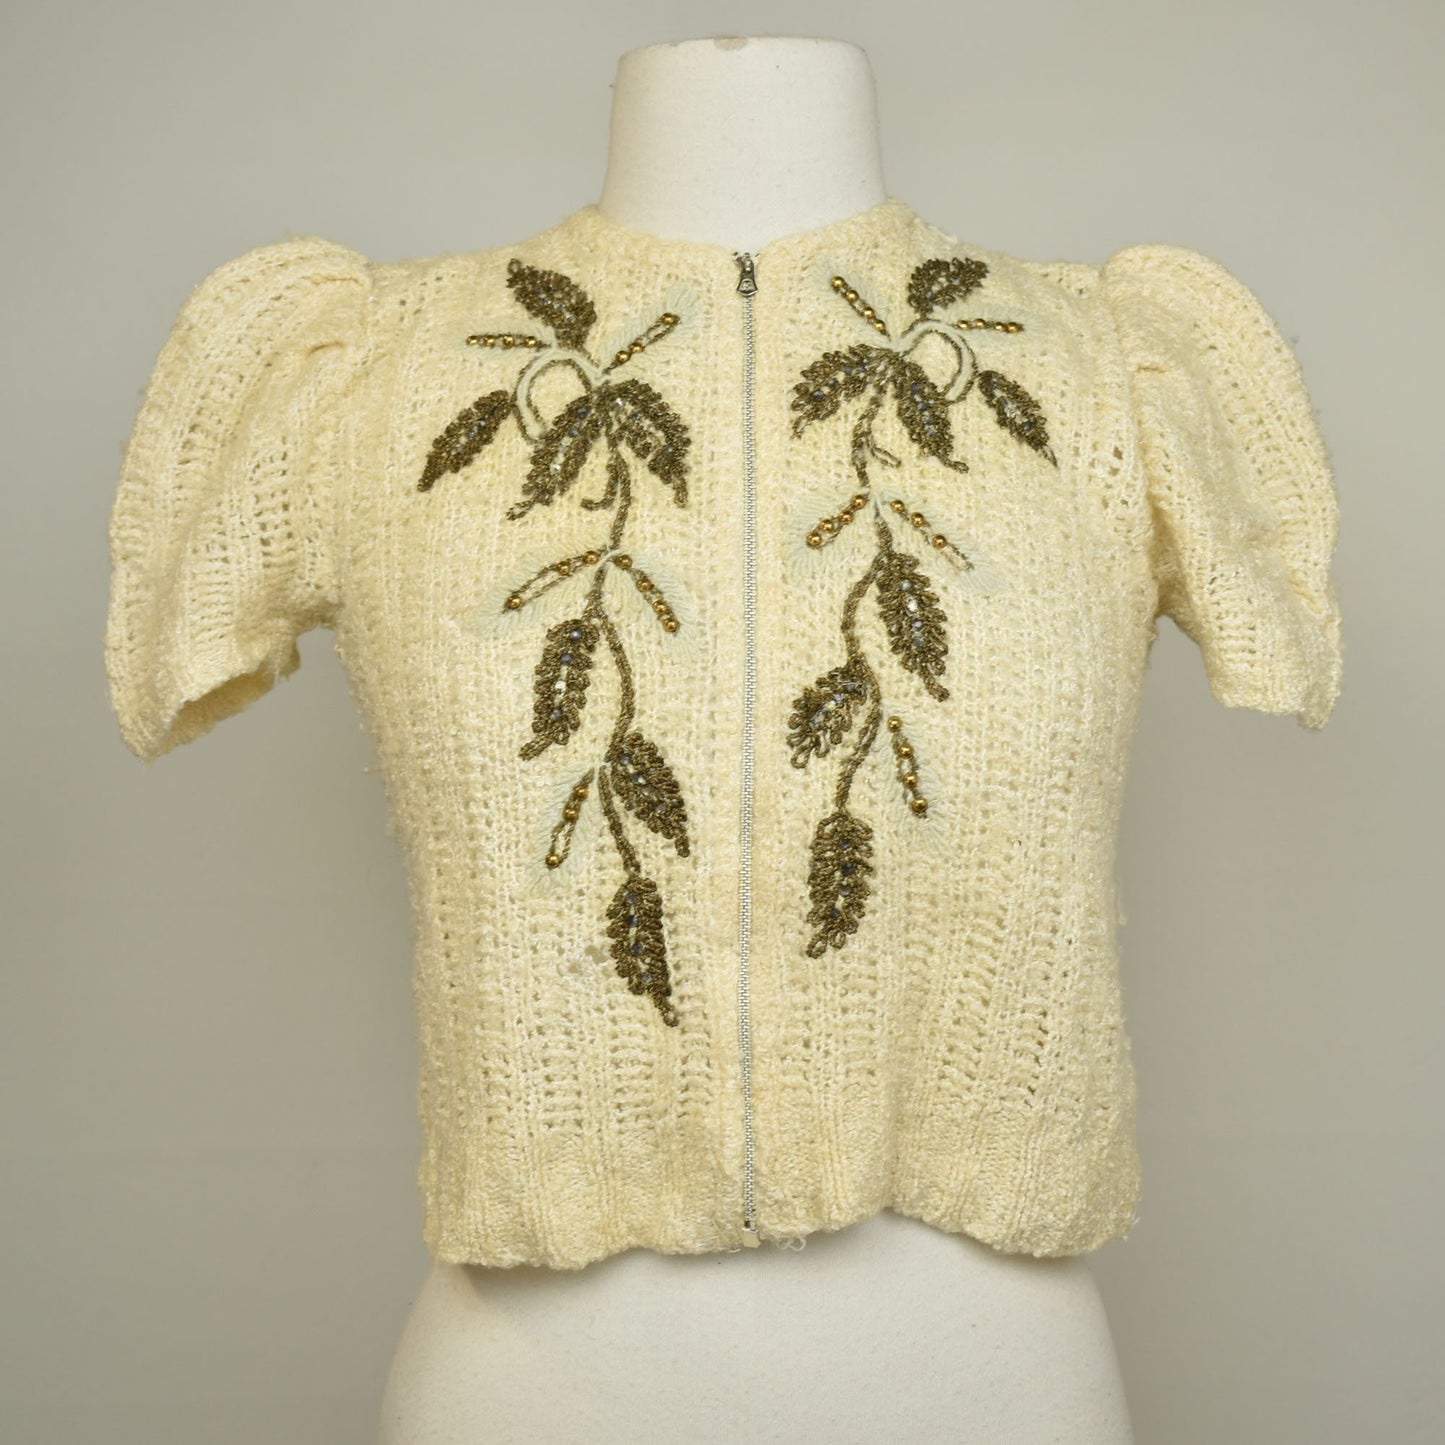 Vintage 1930s Zip Front Sweater with Decorative Gold Embroidery, Bejewelled and Beaded - Talon Zipper